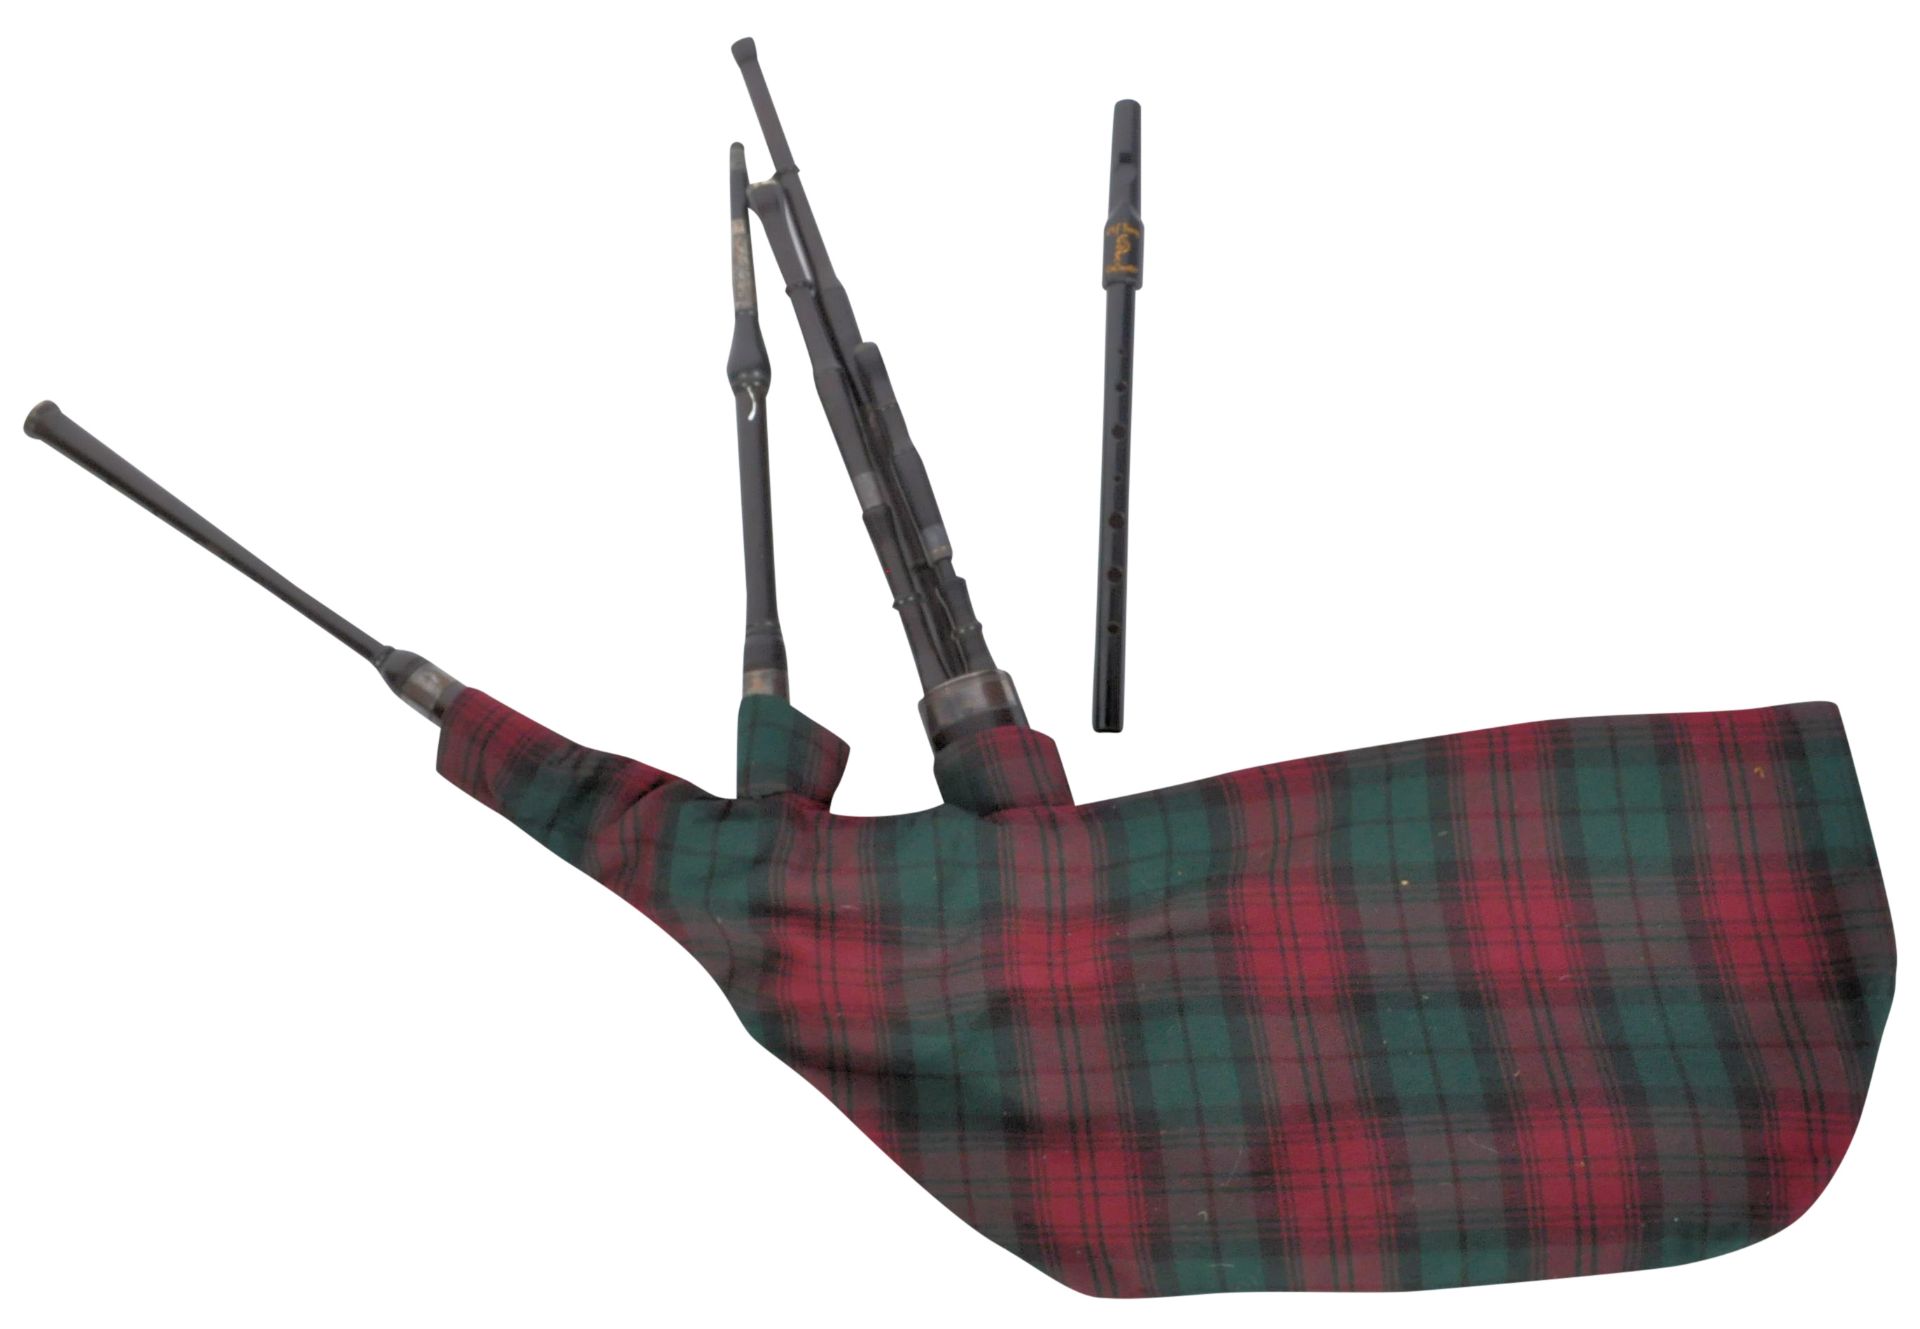 SET OF ORIGINAL SCOTTISH BAGPIPES AND CHANTER WHISTLE